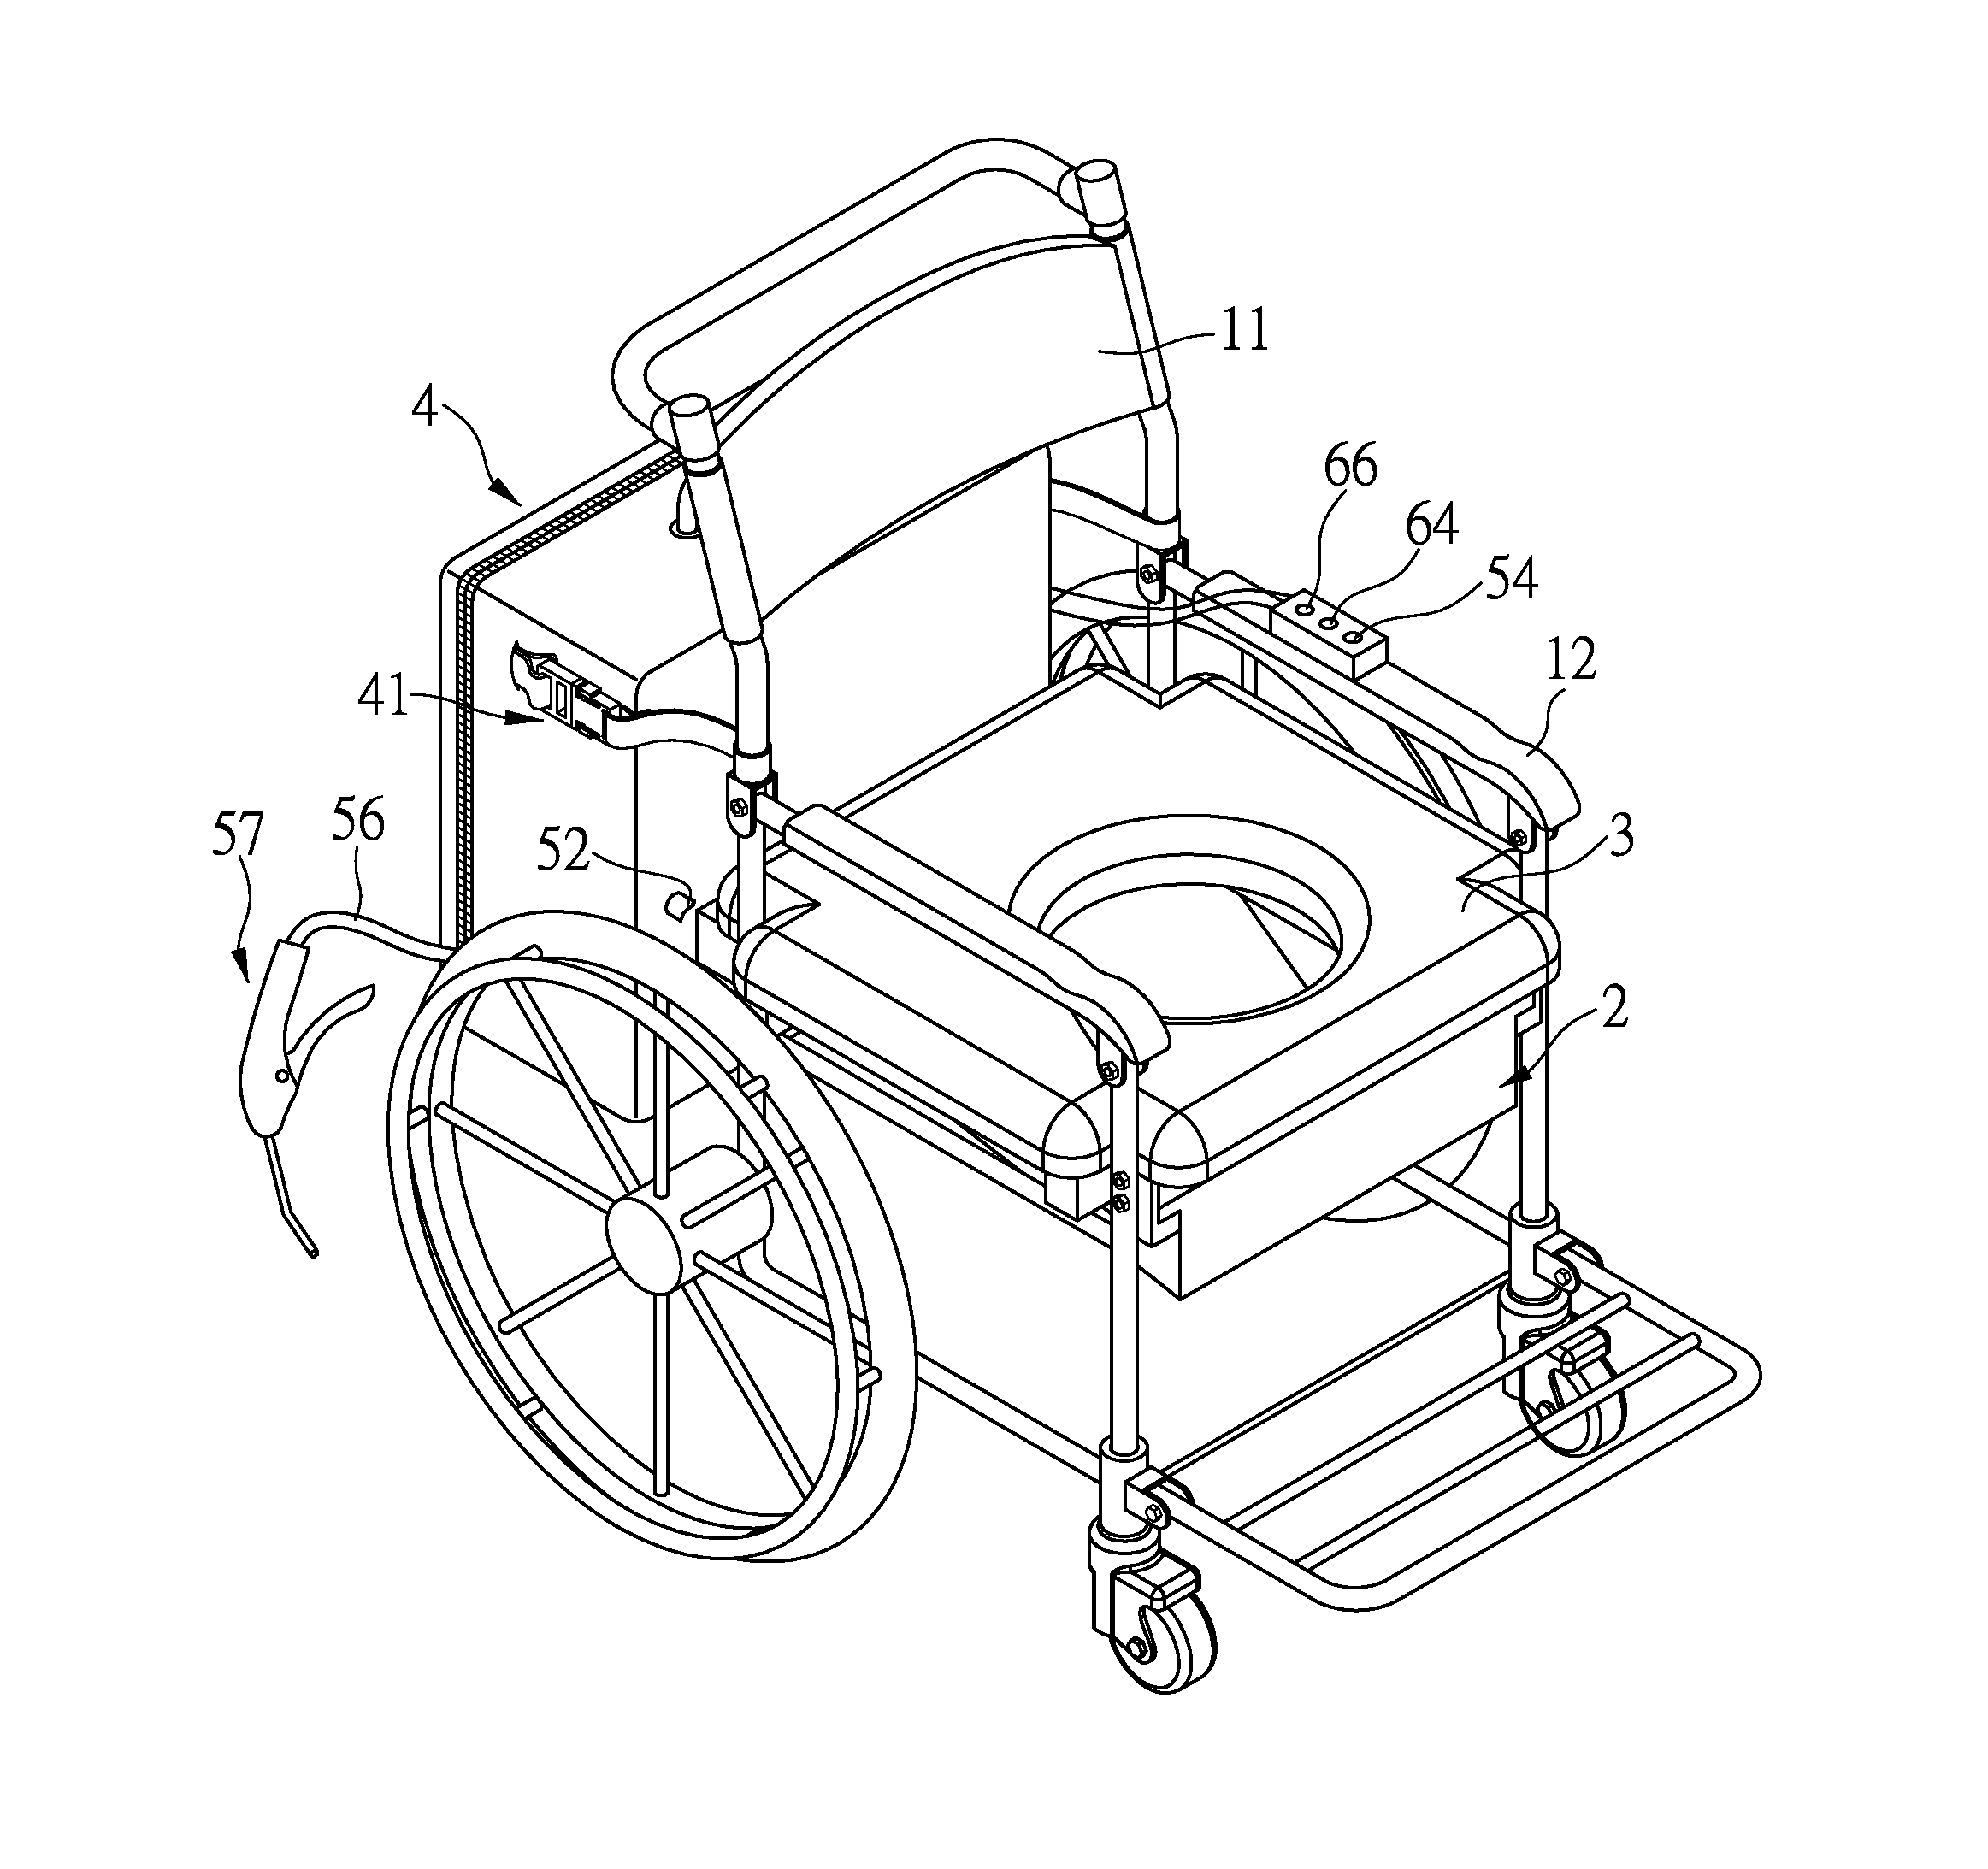 Wheel chair with urinal device